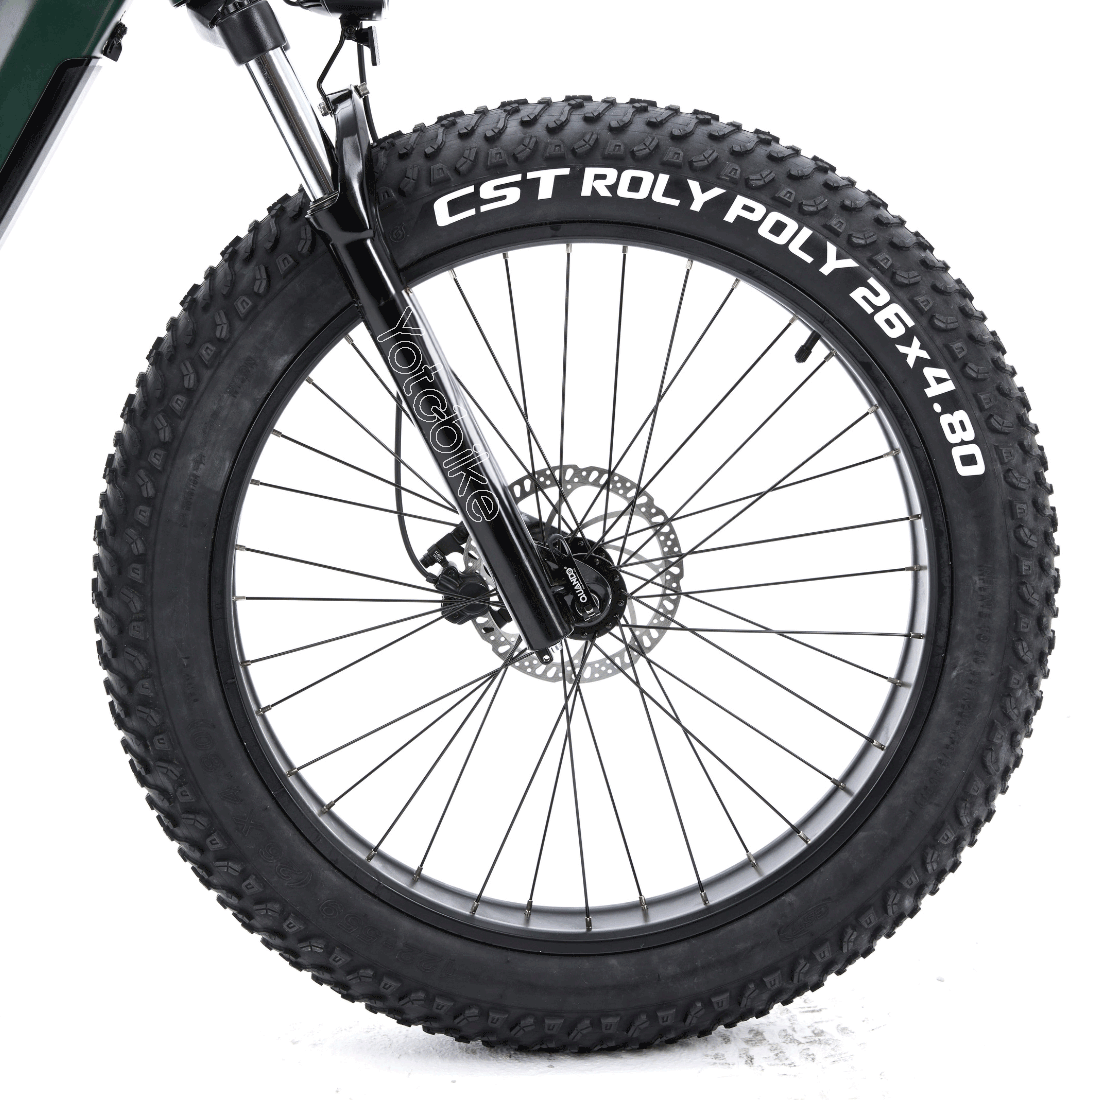 cst-26x4.8-fat-tire-for-hunting-ebike